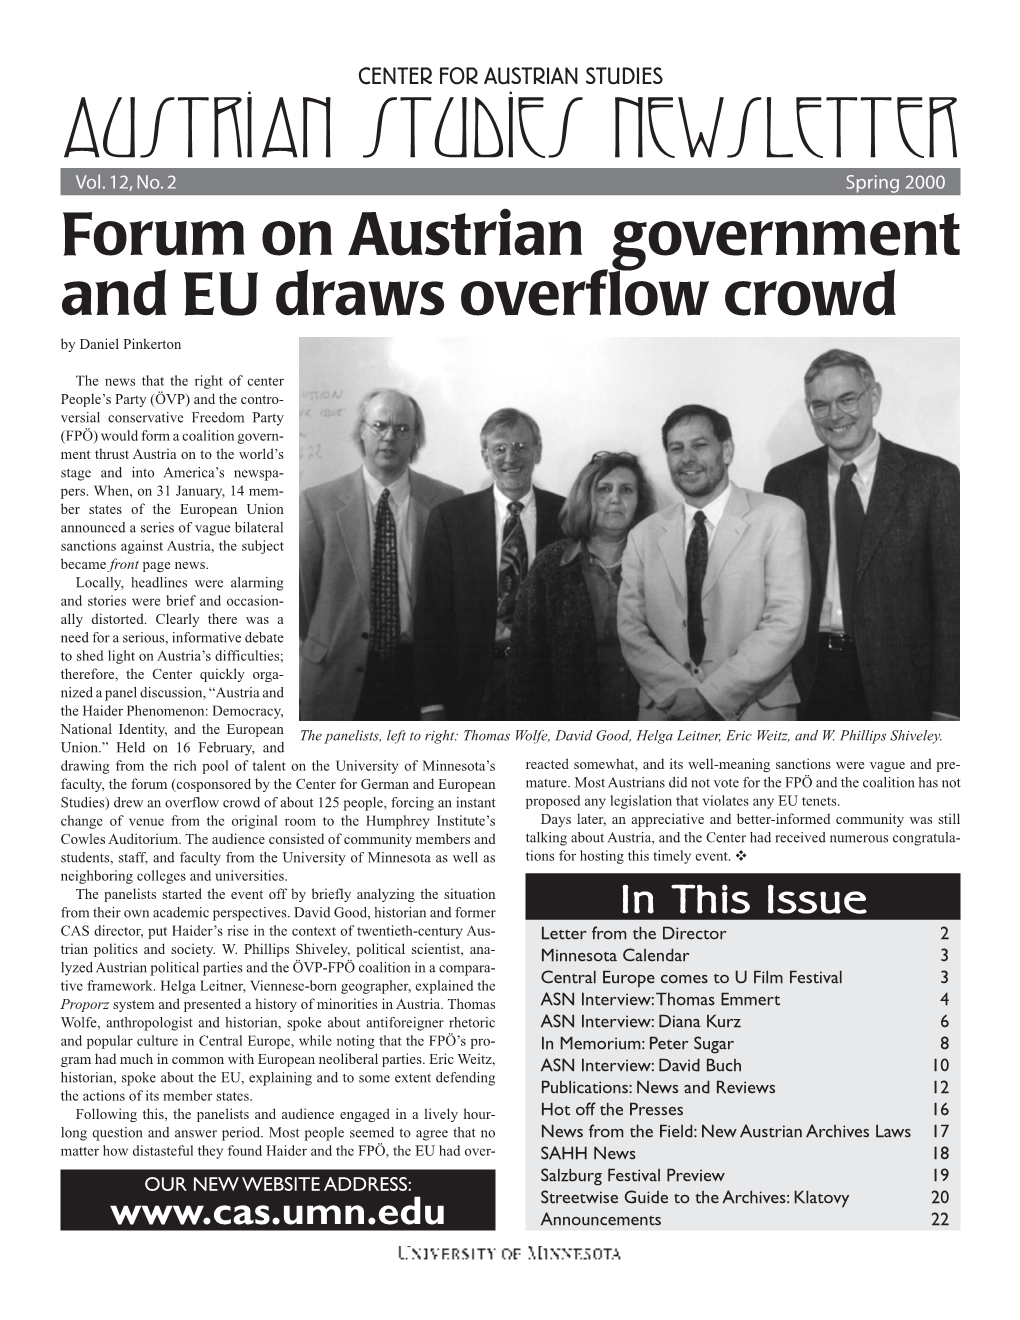 Spring 2000 Forum on Austrian Government and EU Draws Overflow Crowd by Daniel Pinkerton